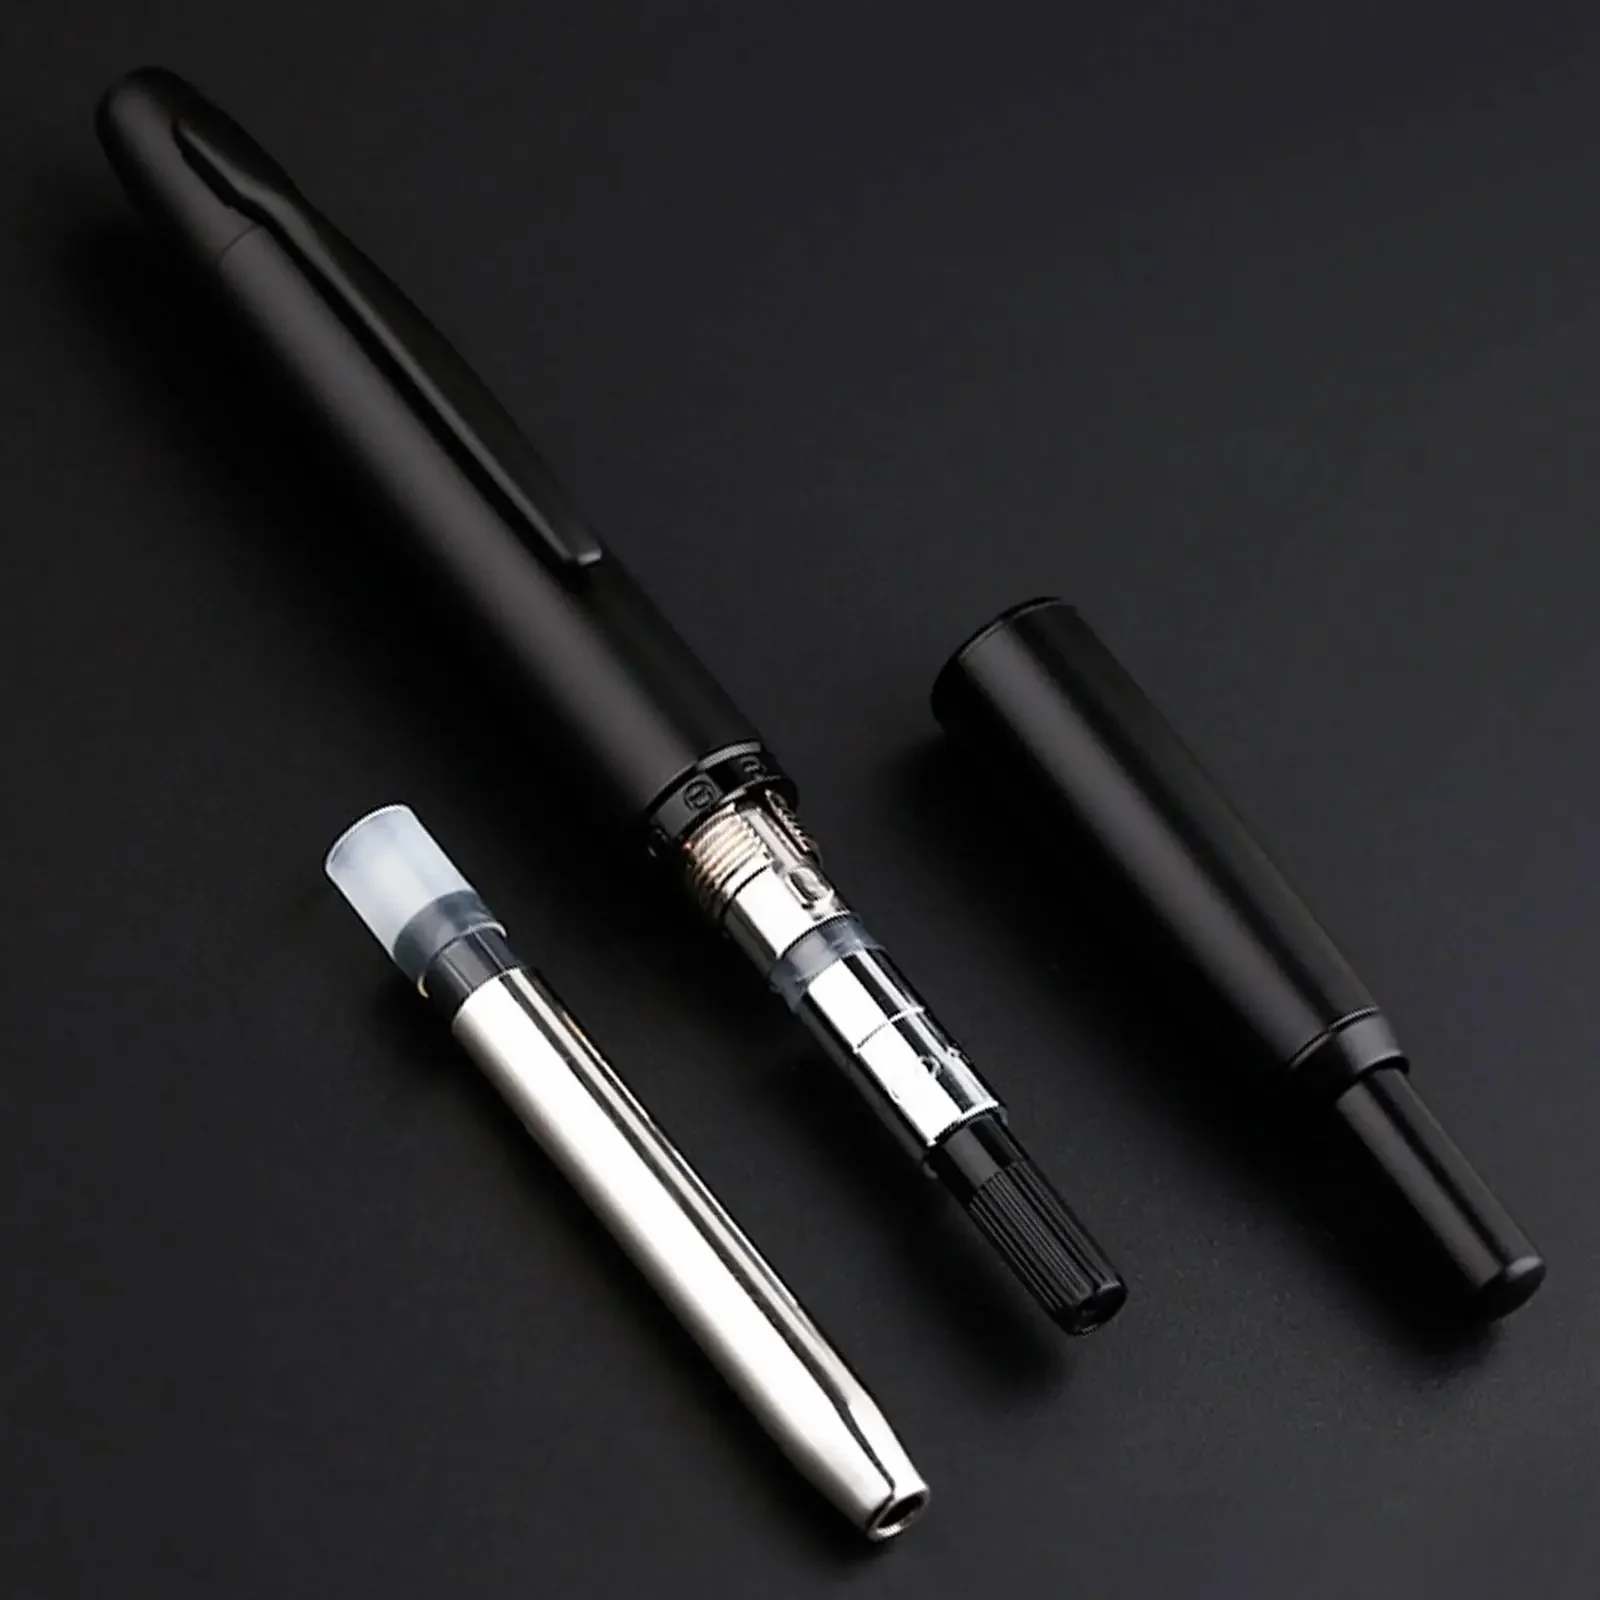 New Majohn A1 fountain pen Metal sliver Press pen Striped pattern EF 0.4MM Nibs writing gift pens for syudents office supplies